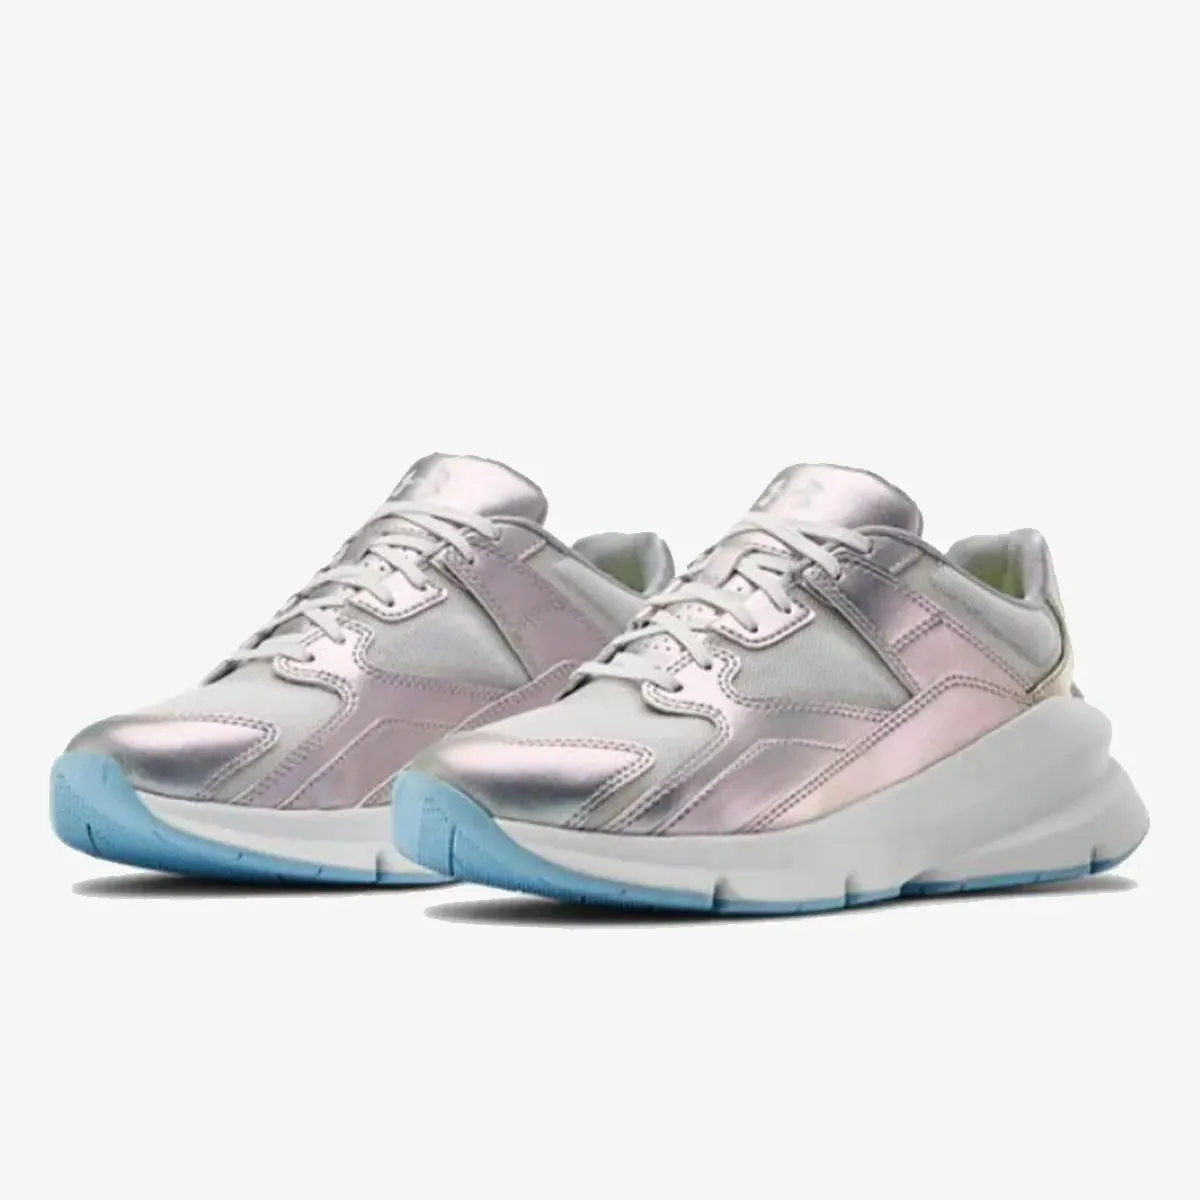 Under Armour UA Forge 96 HL Iridescent Sportstyle Shoes 